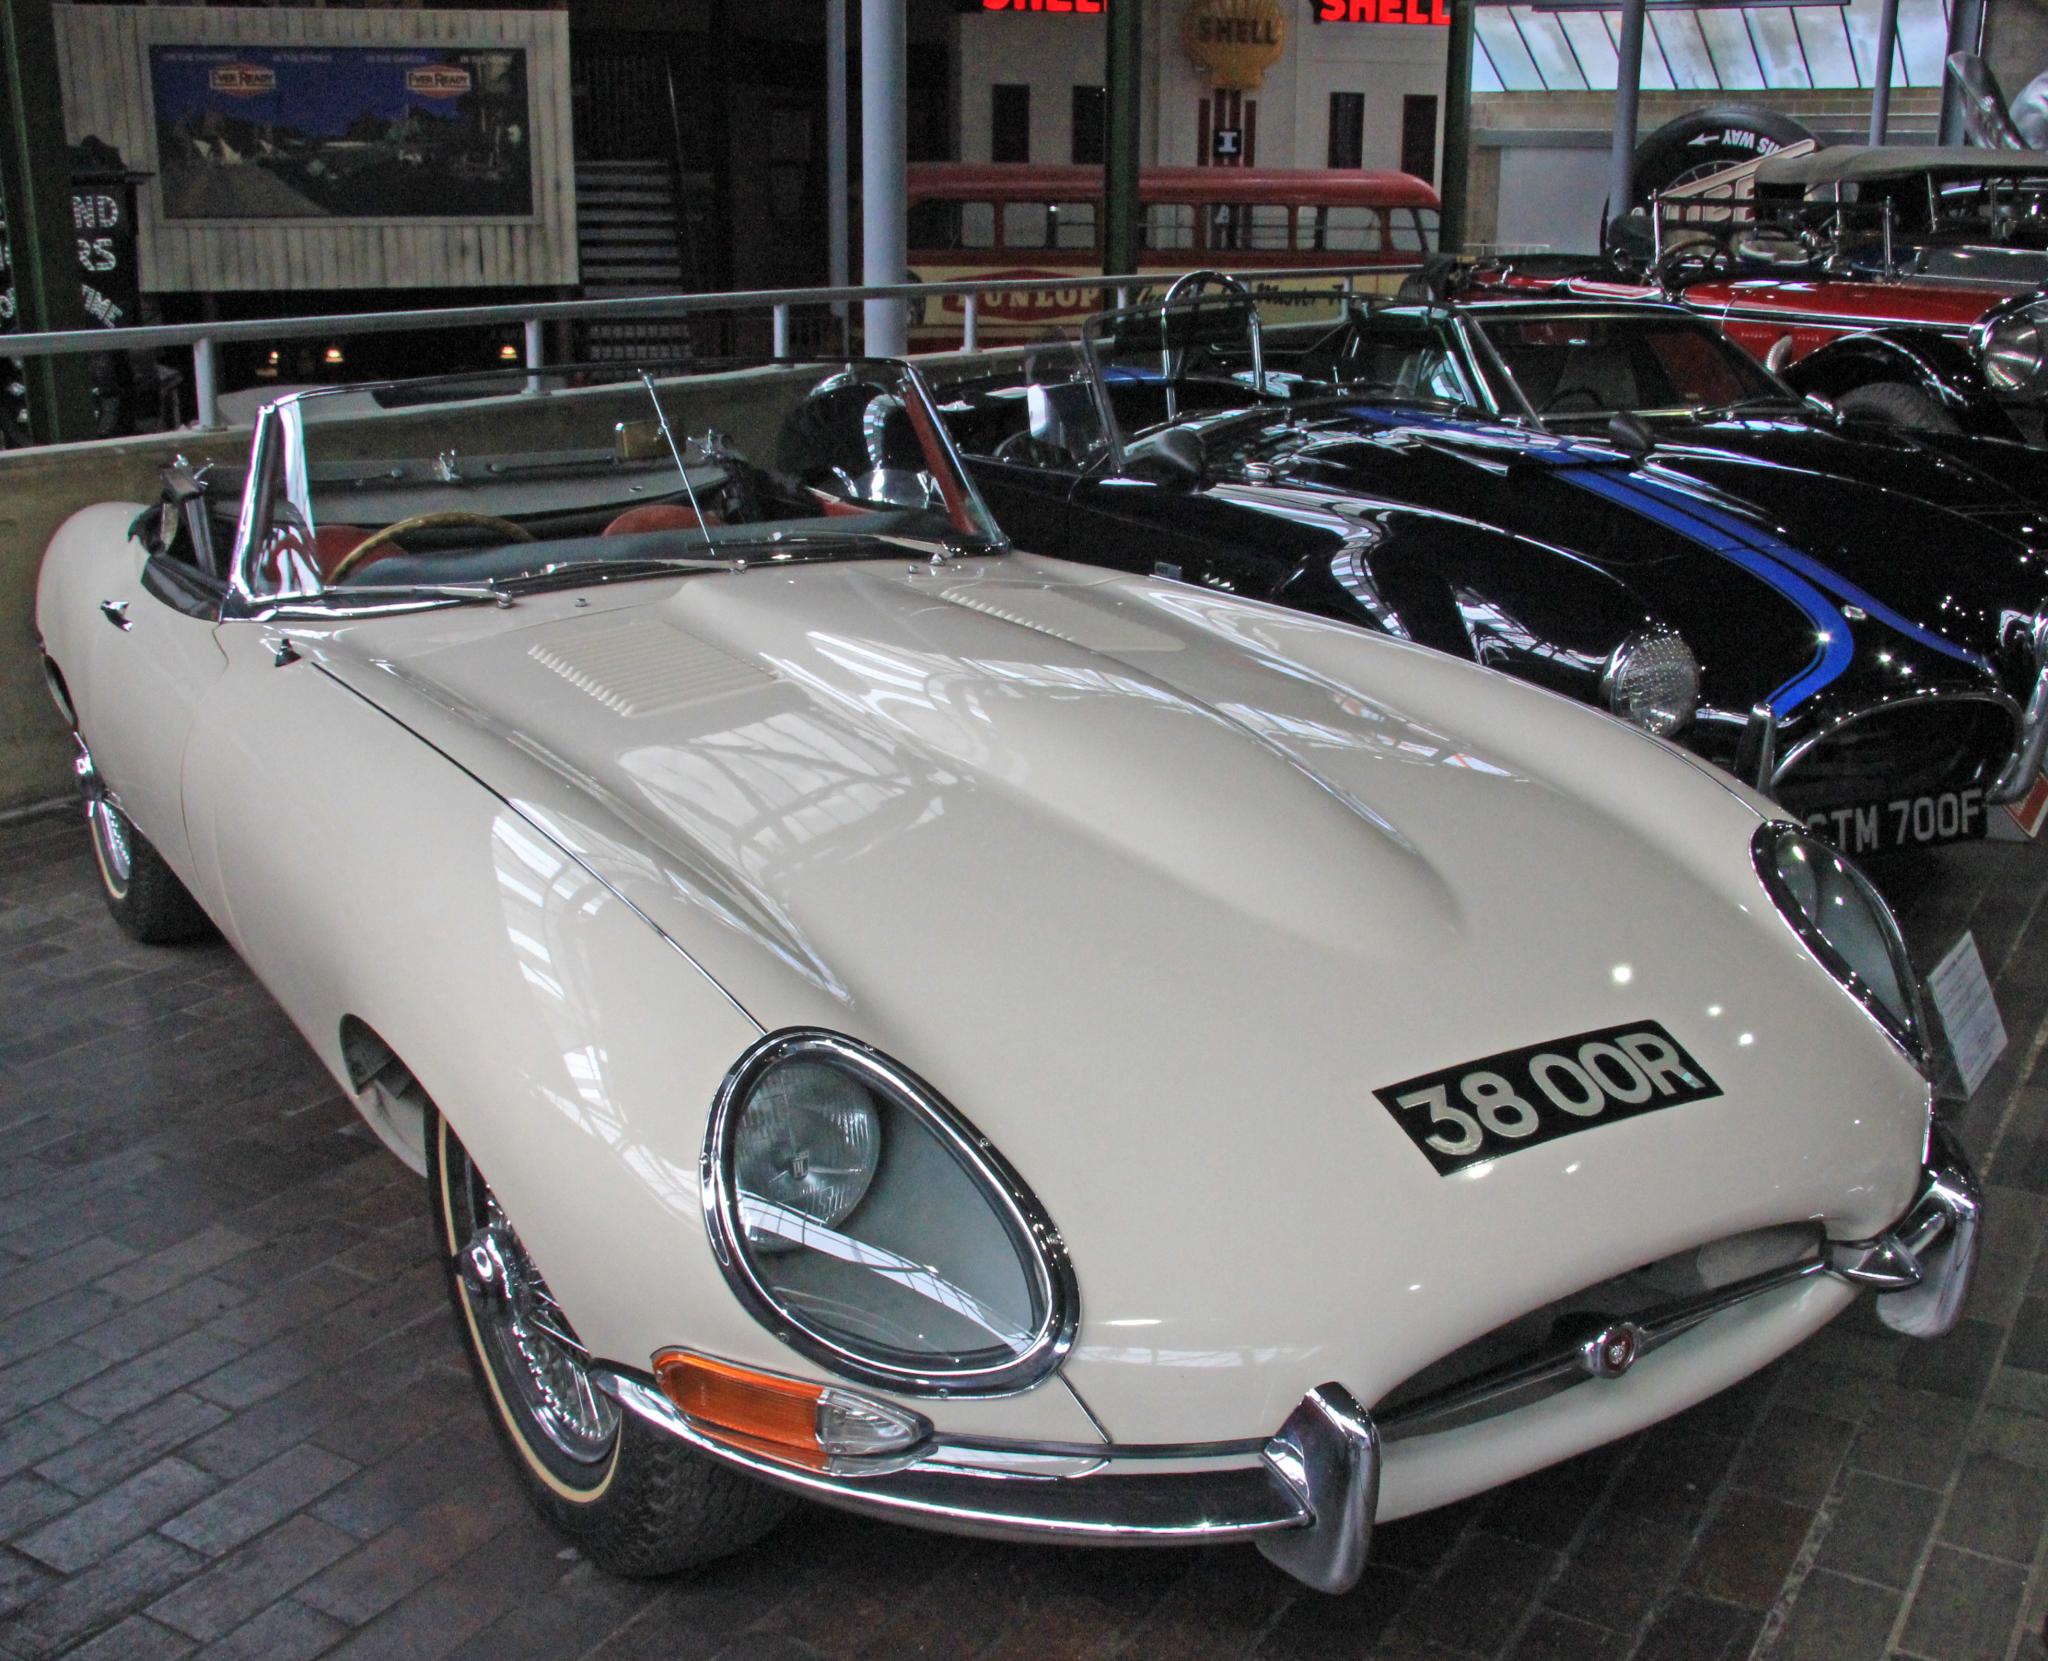 many classic automobiles are parked in a car showroom